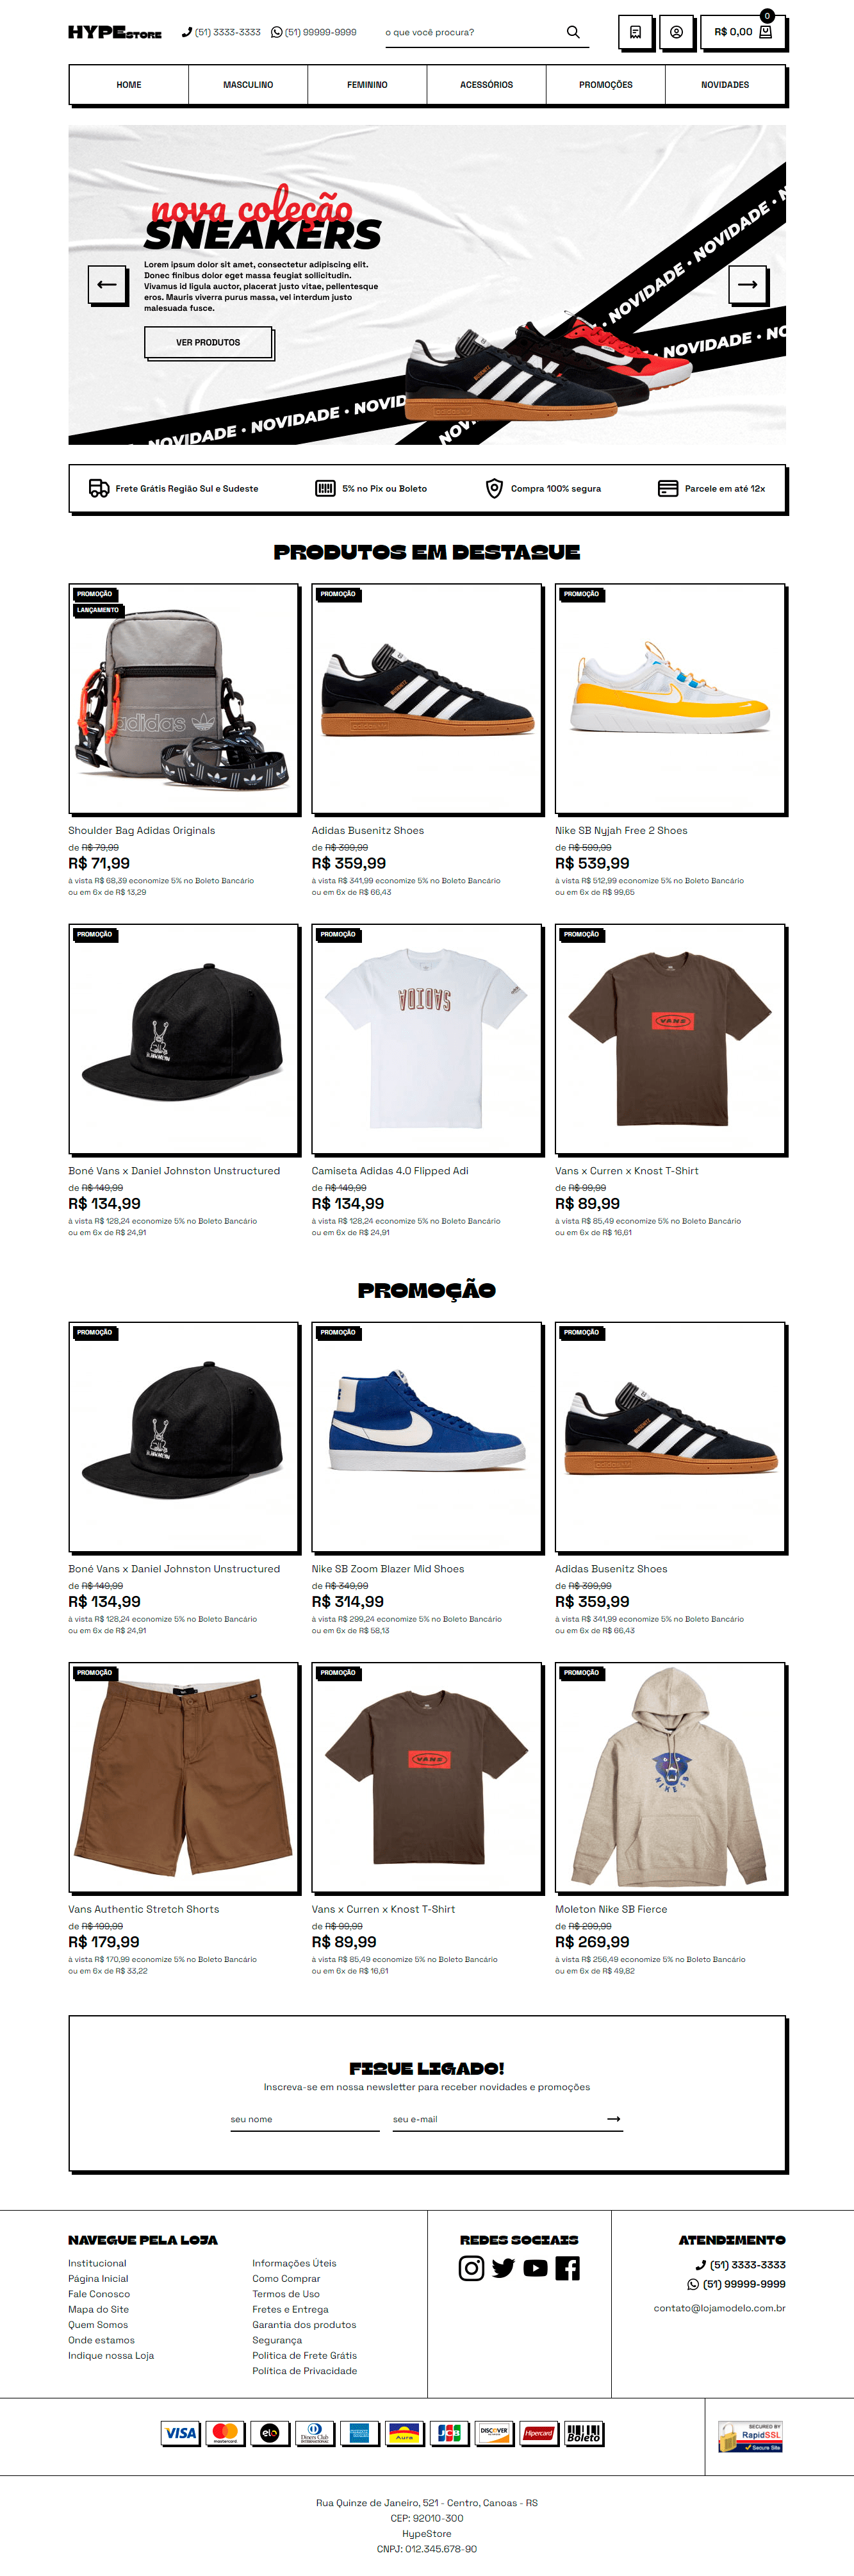 Hype Store